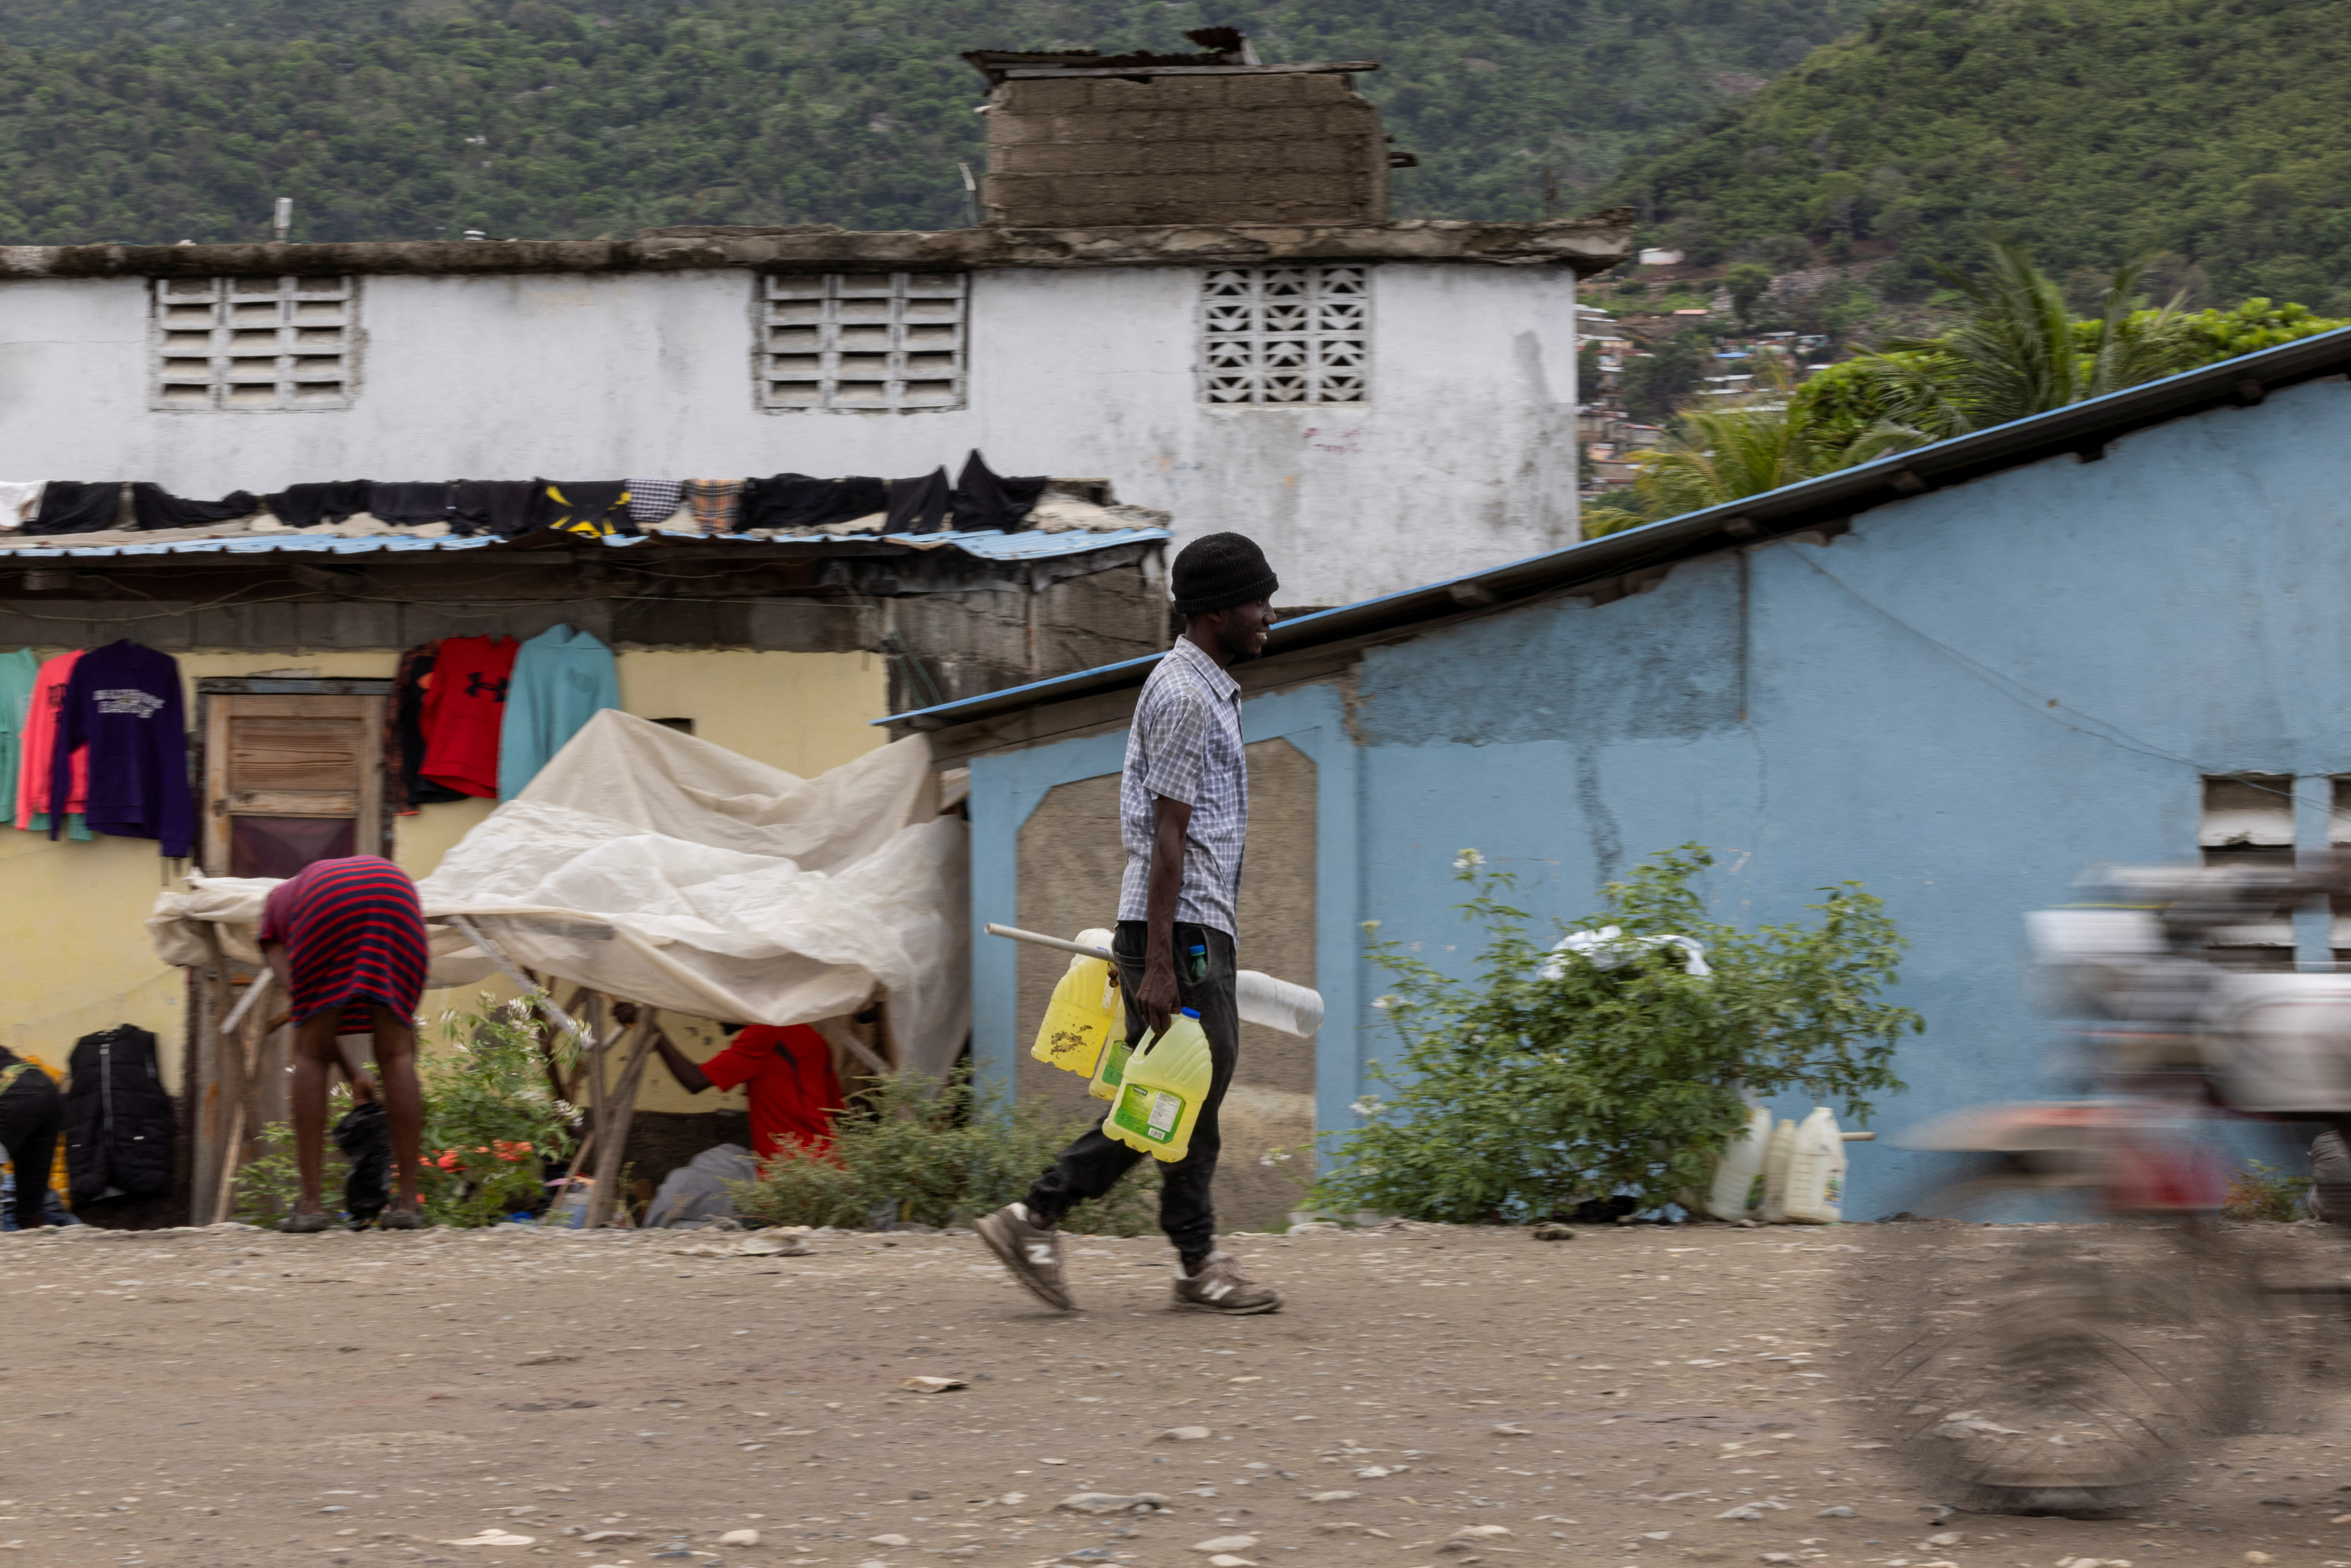 Daily life in Cap-Haitien, following the installation of the Haiti transitional government in Port-au-Prince